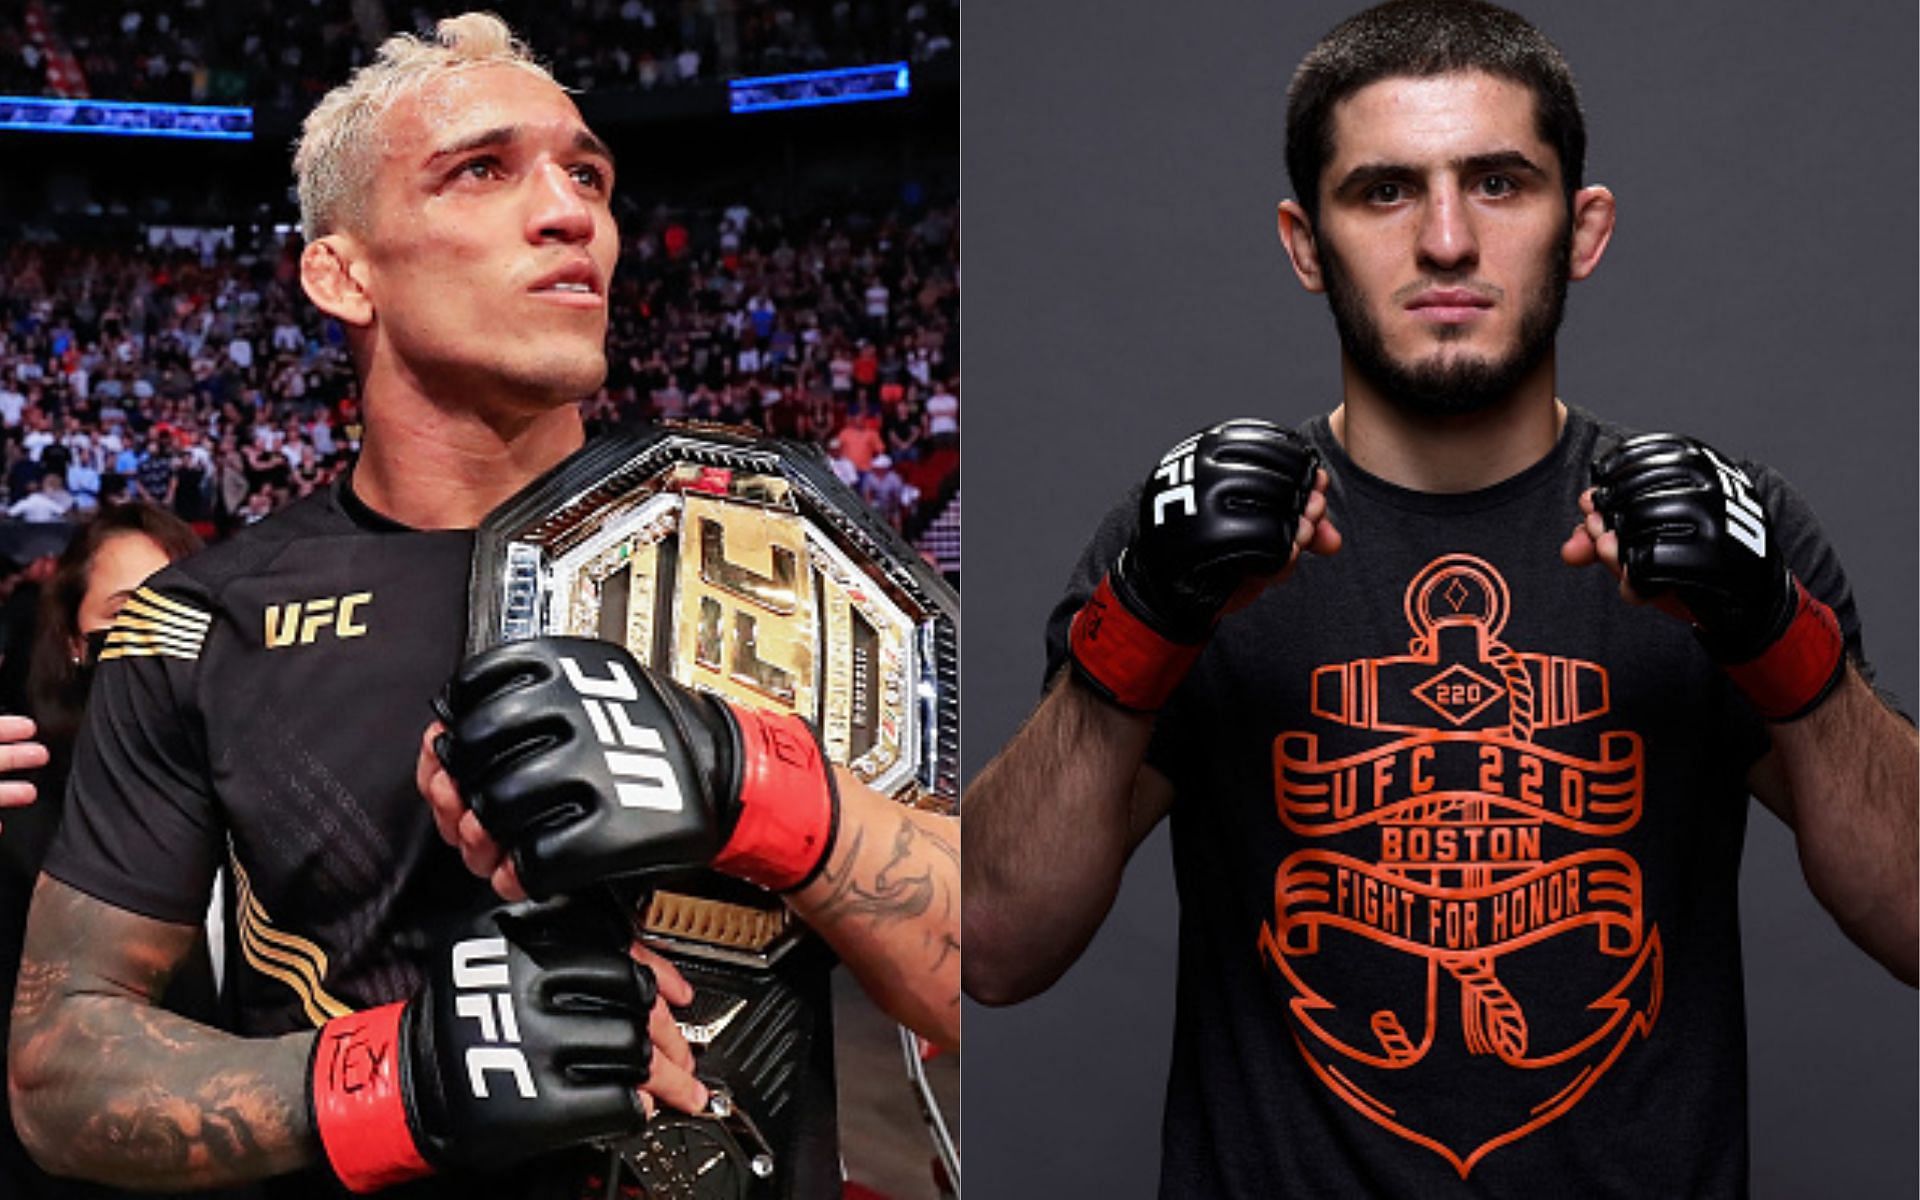 Charles Oliveira (left) and Islam Makhachev (right)(Images via Getty)